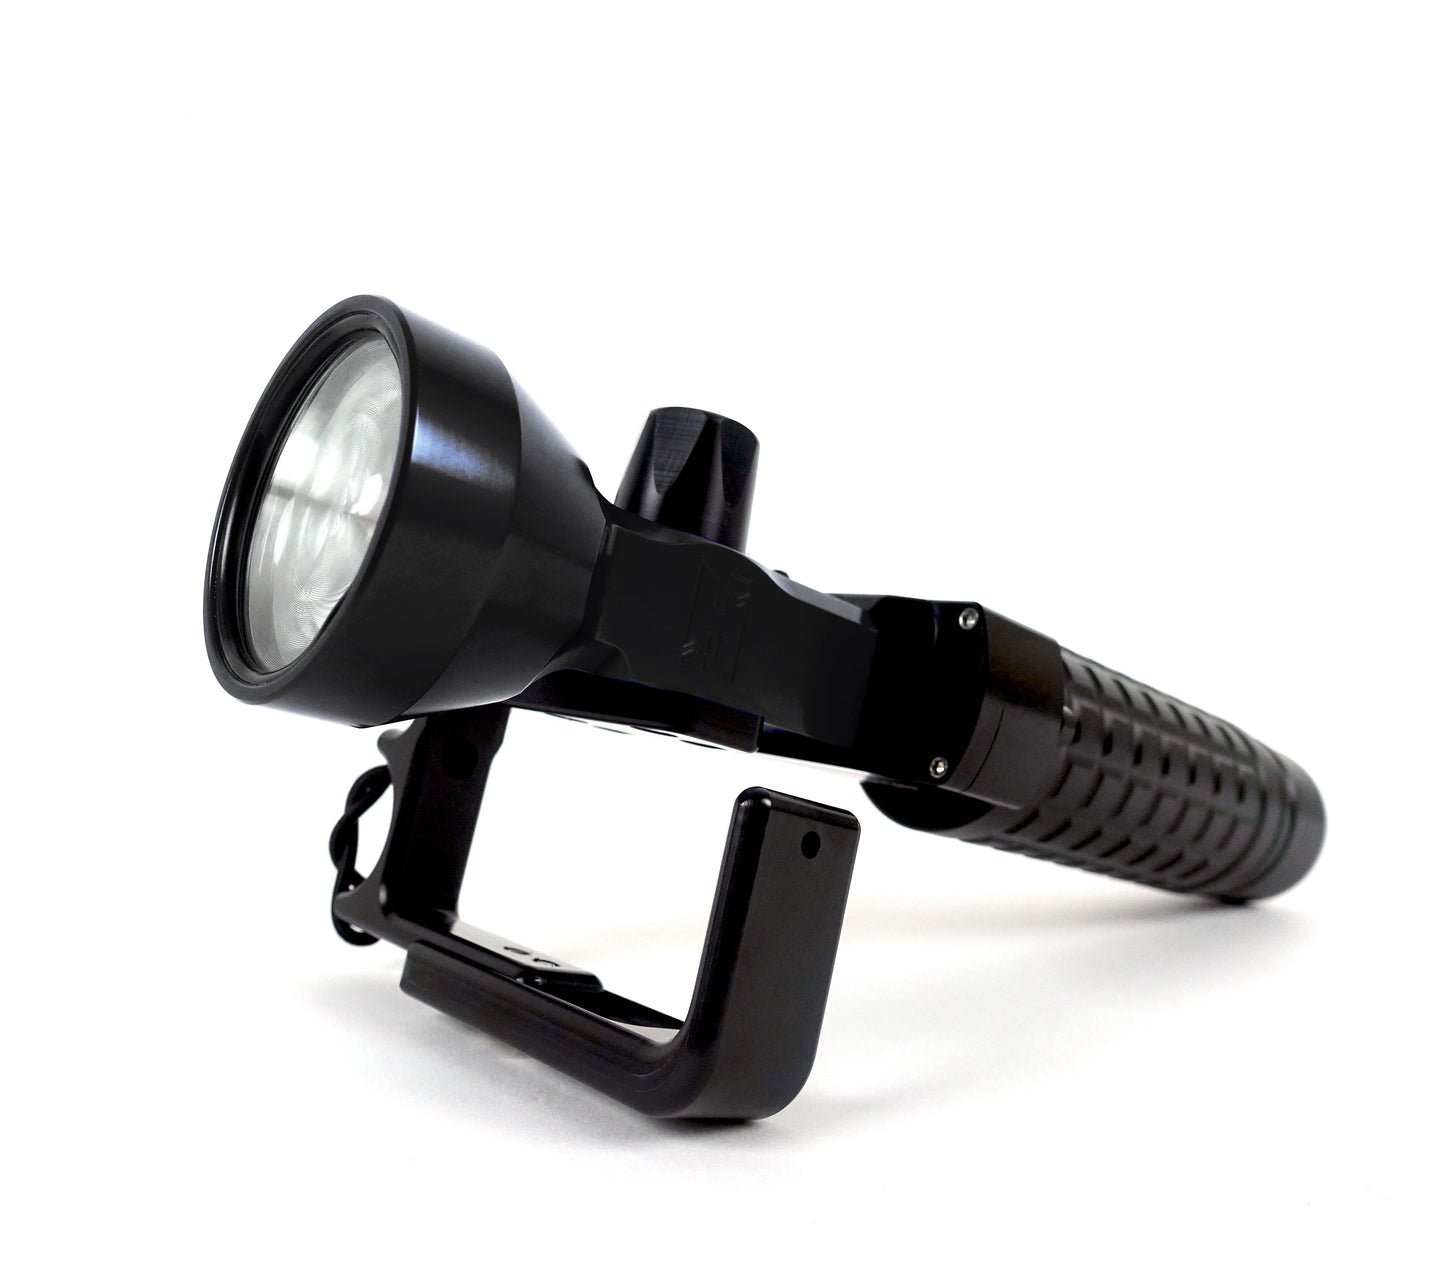 Halcyon Focus 2.0 Dive Light System - Cord or Handheld